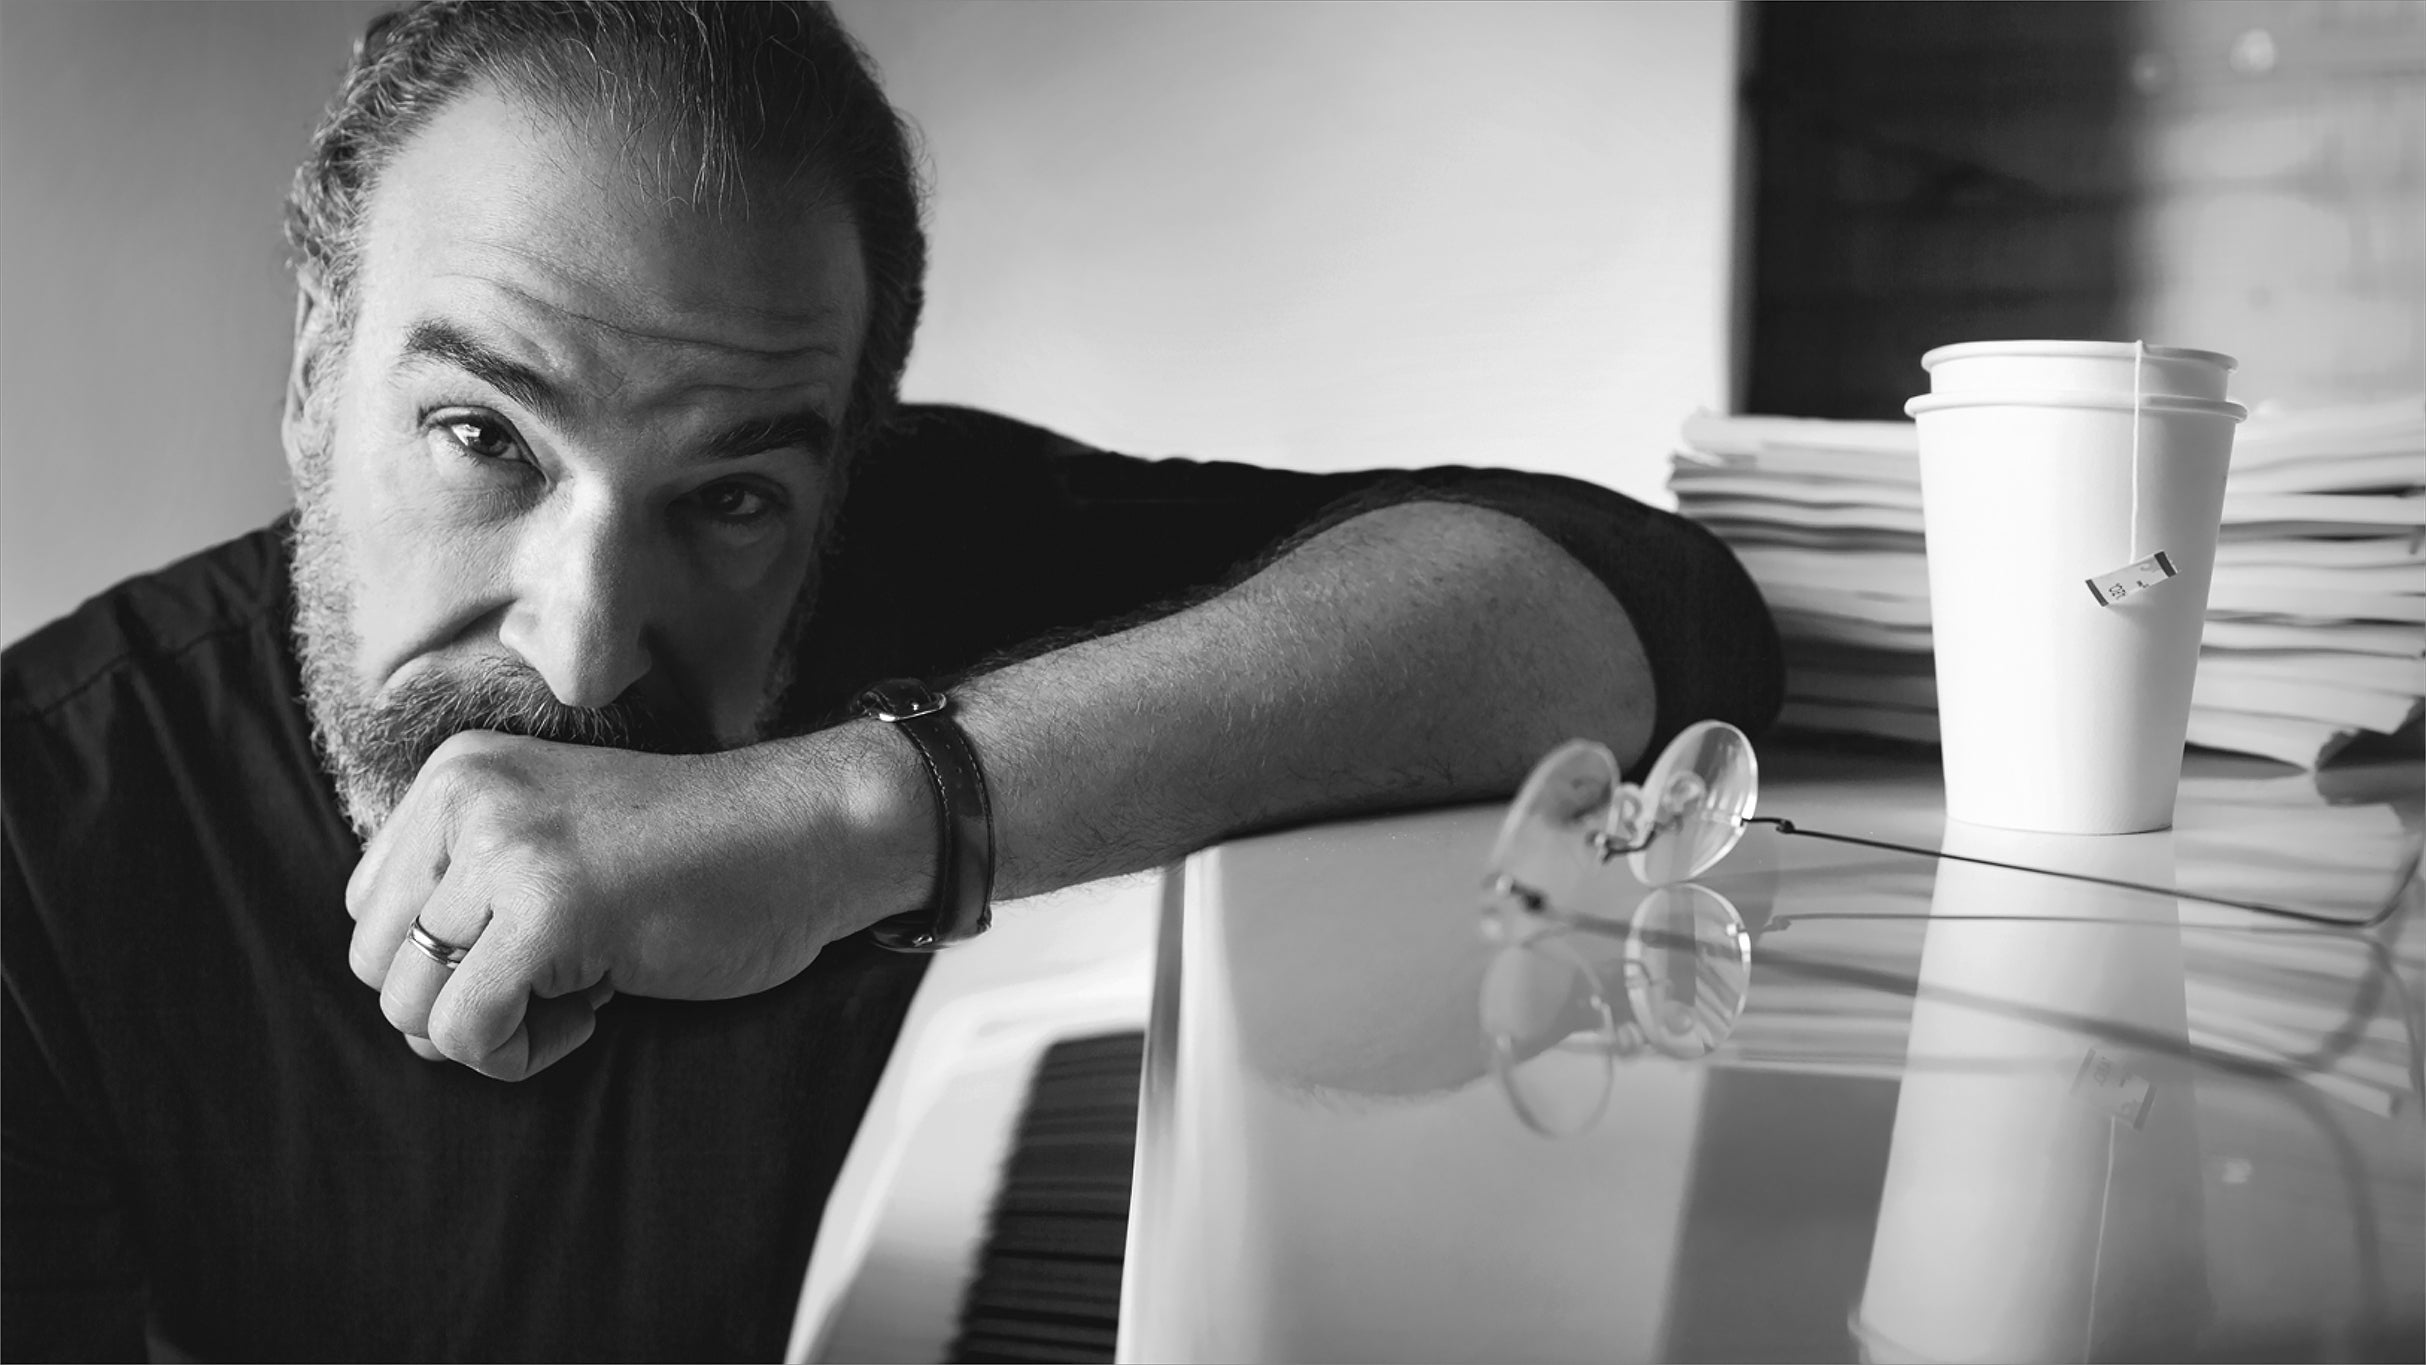 Mandy Patinkin in Concert: BEING ALIVE with Adam Ben-David on Piano presales in San Diego